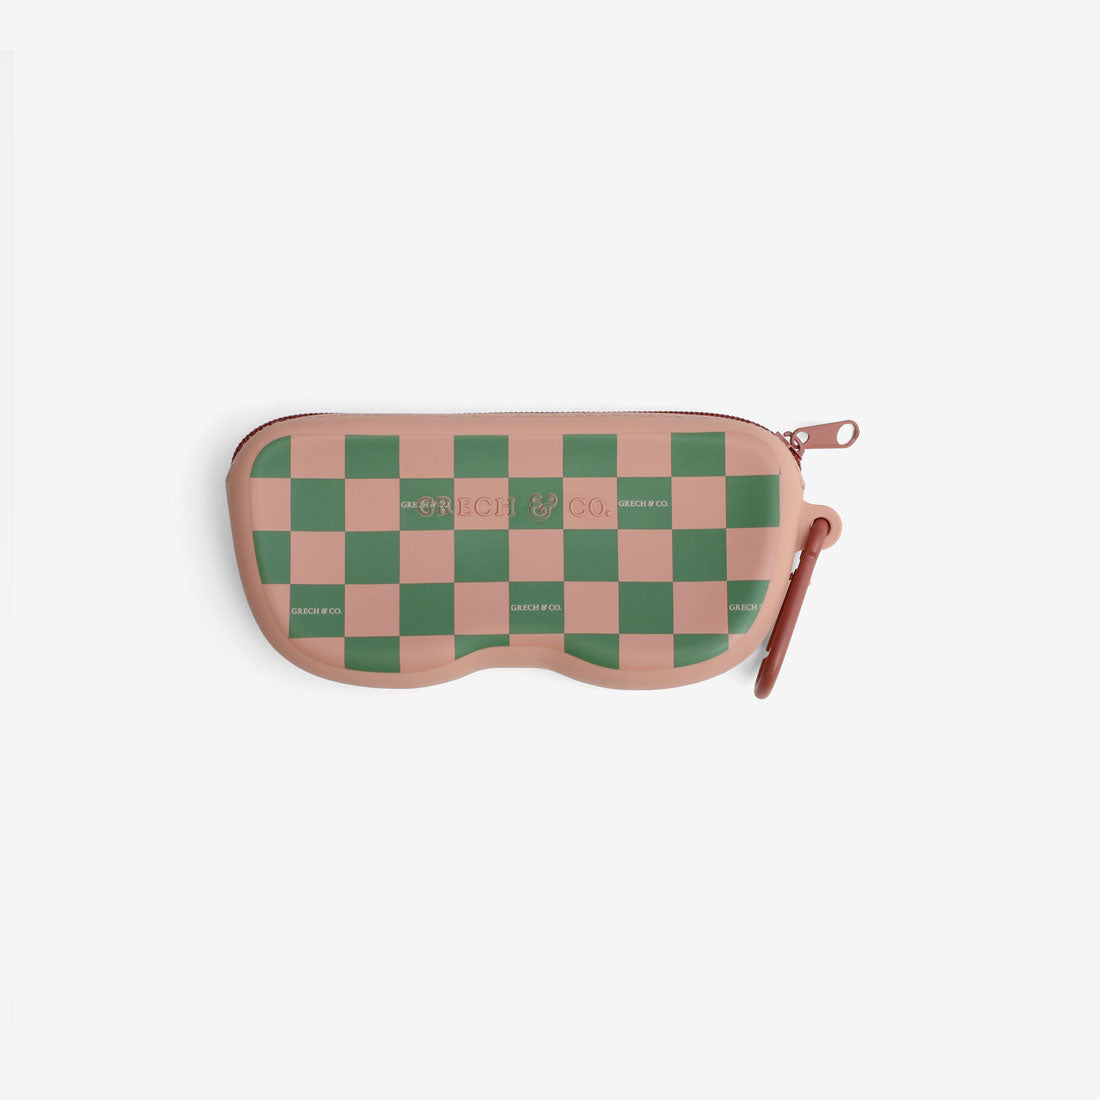 Silicone Sunnies Case - Sunset+Orchard Check